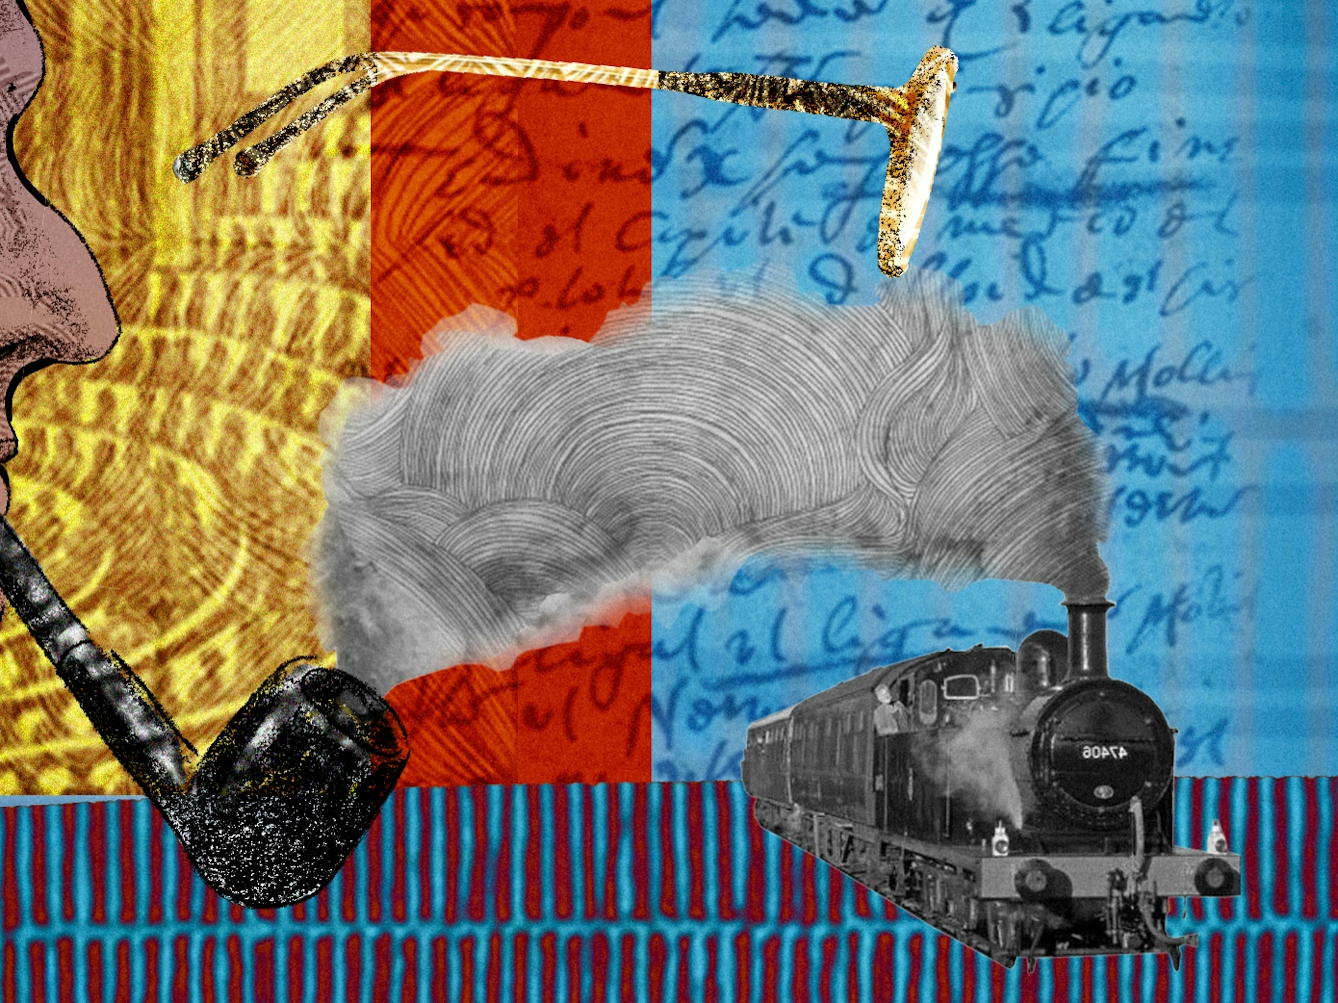 An abstract digital illustration featuring a head and shoulders portrait of a man in profile facing right, smoking a pipe, depicting the writer Jacques Derrida. In the background is a collage of handwritten notes and archive material depictions of a lecture theatre and x-rays. To the right are a floating pair of glasses and a steam train.